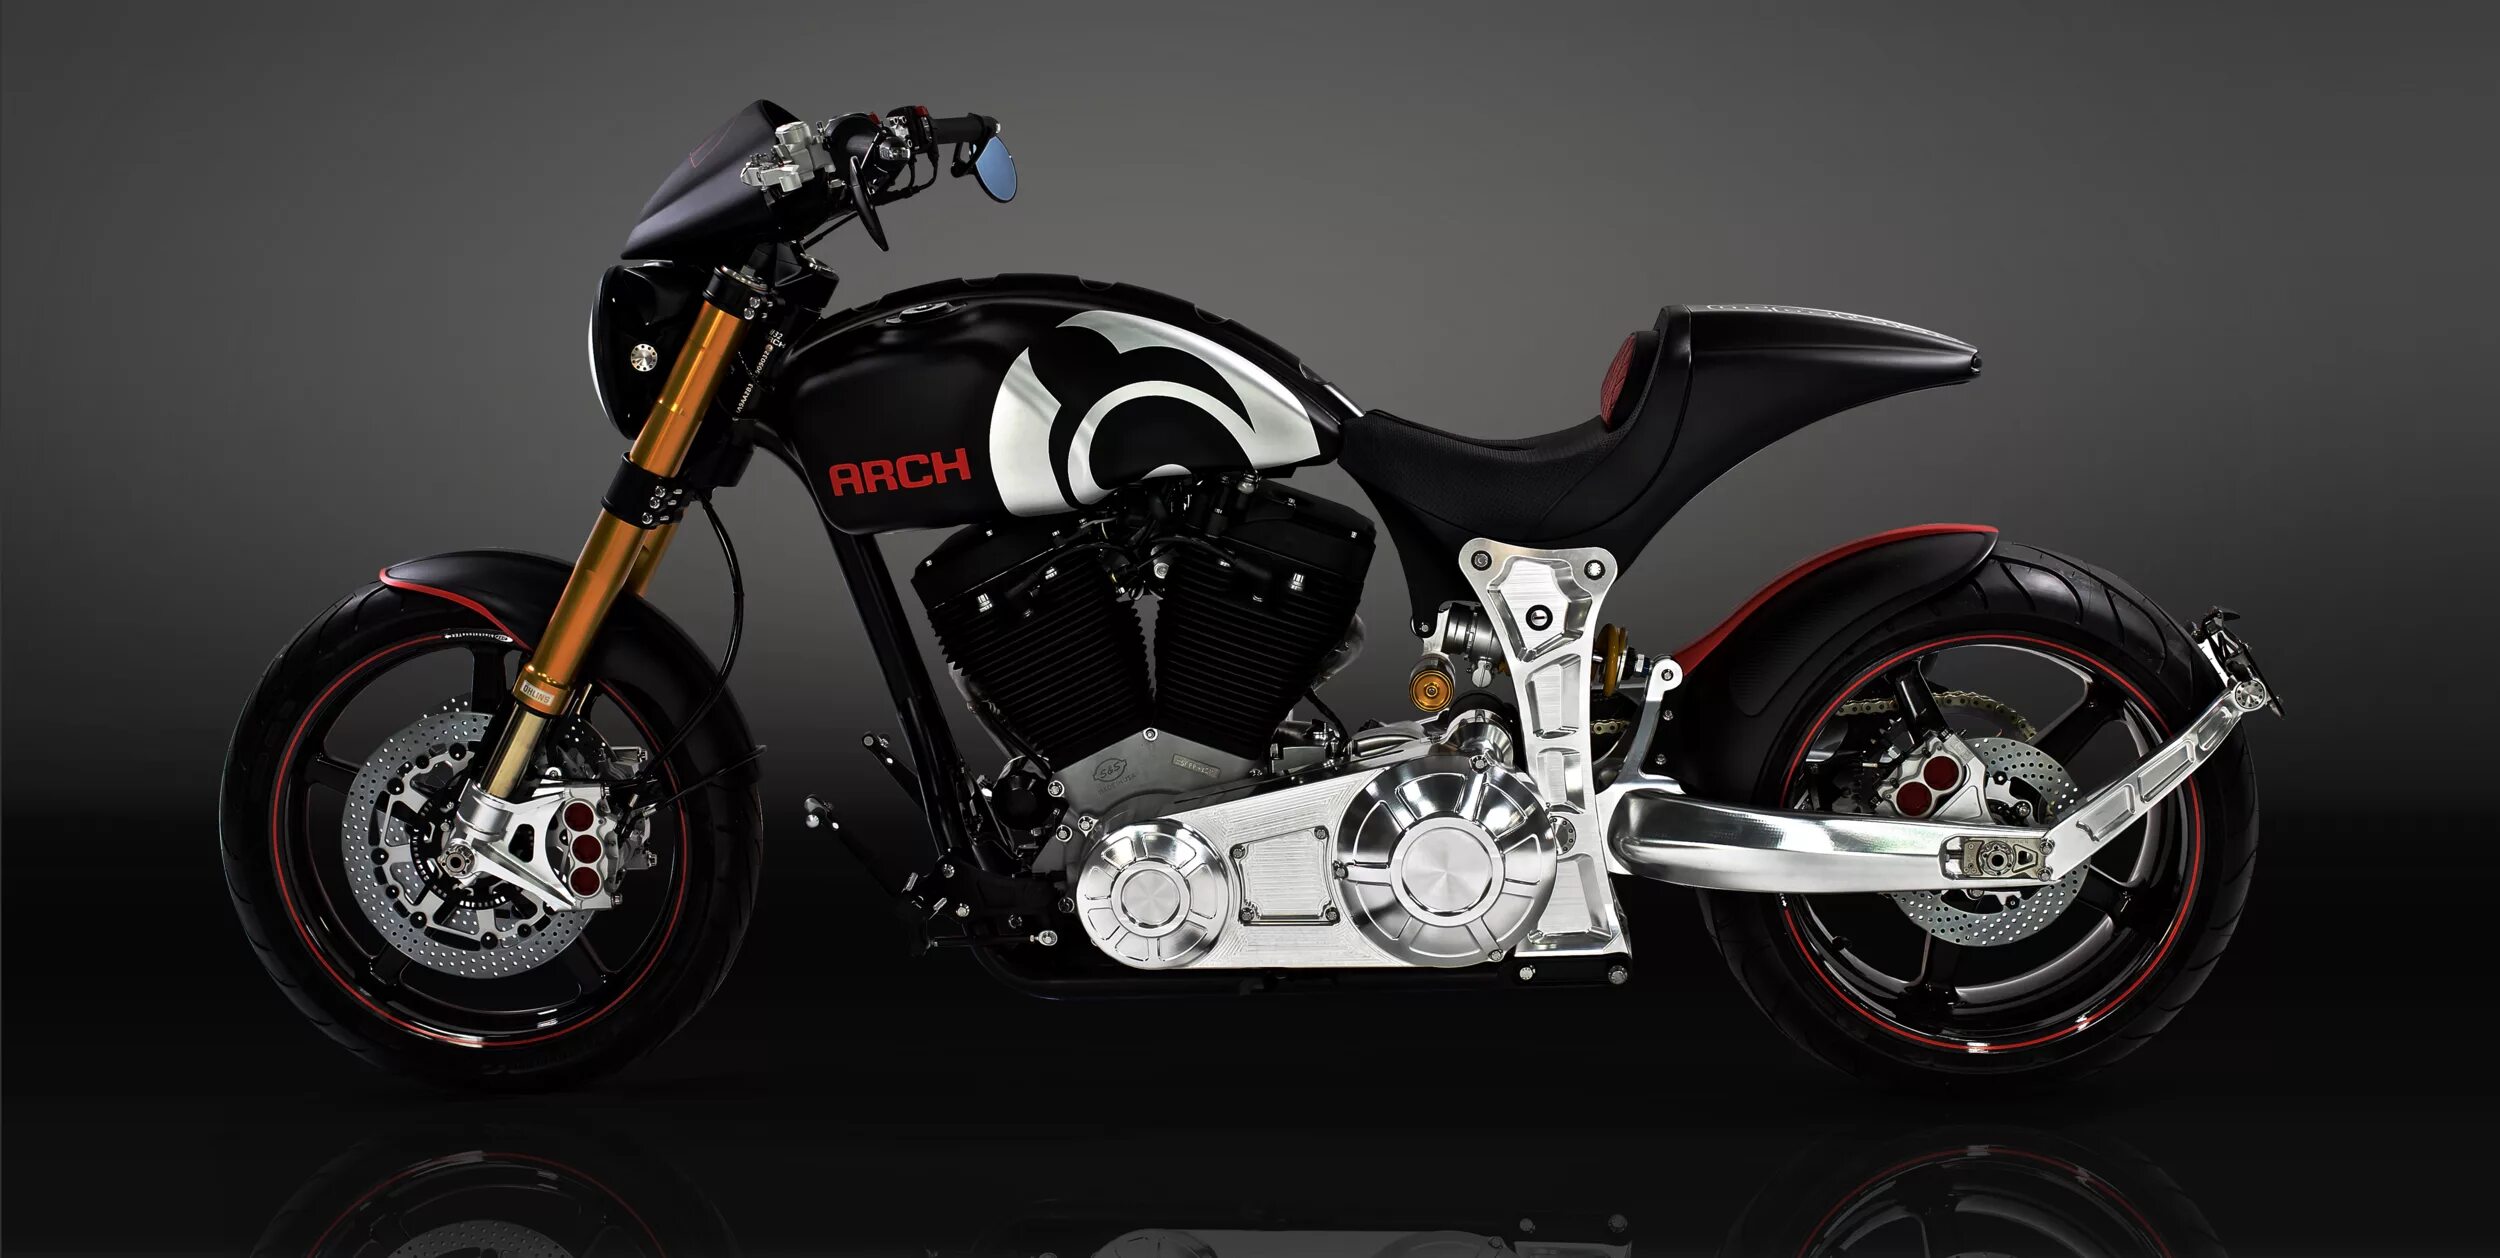 Arch KRGT-1. Arch Motorcycle KRGT-1. Киану Ривз мотоциклы Arch. Arch Motorcycle мотоциклы. Мотоцикл arch